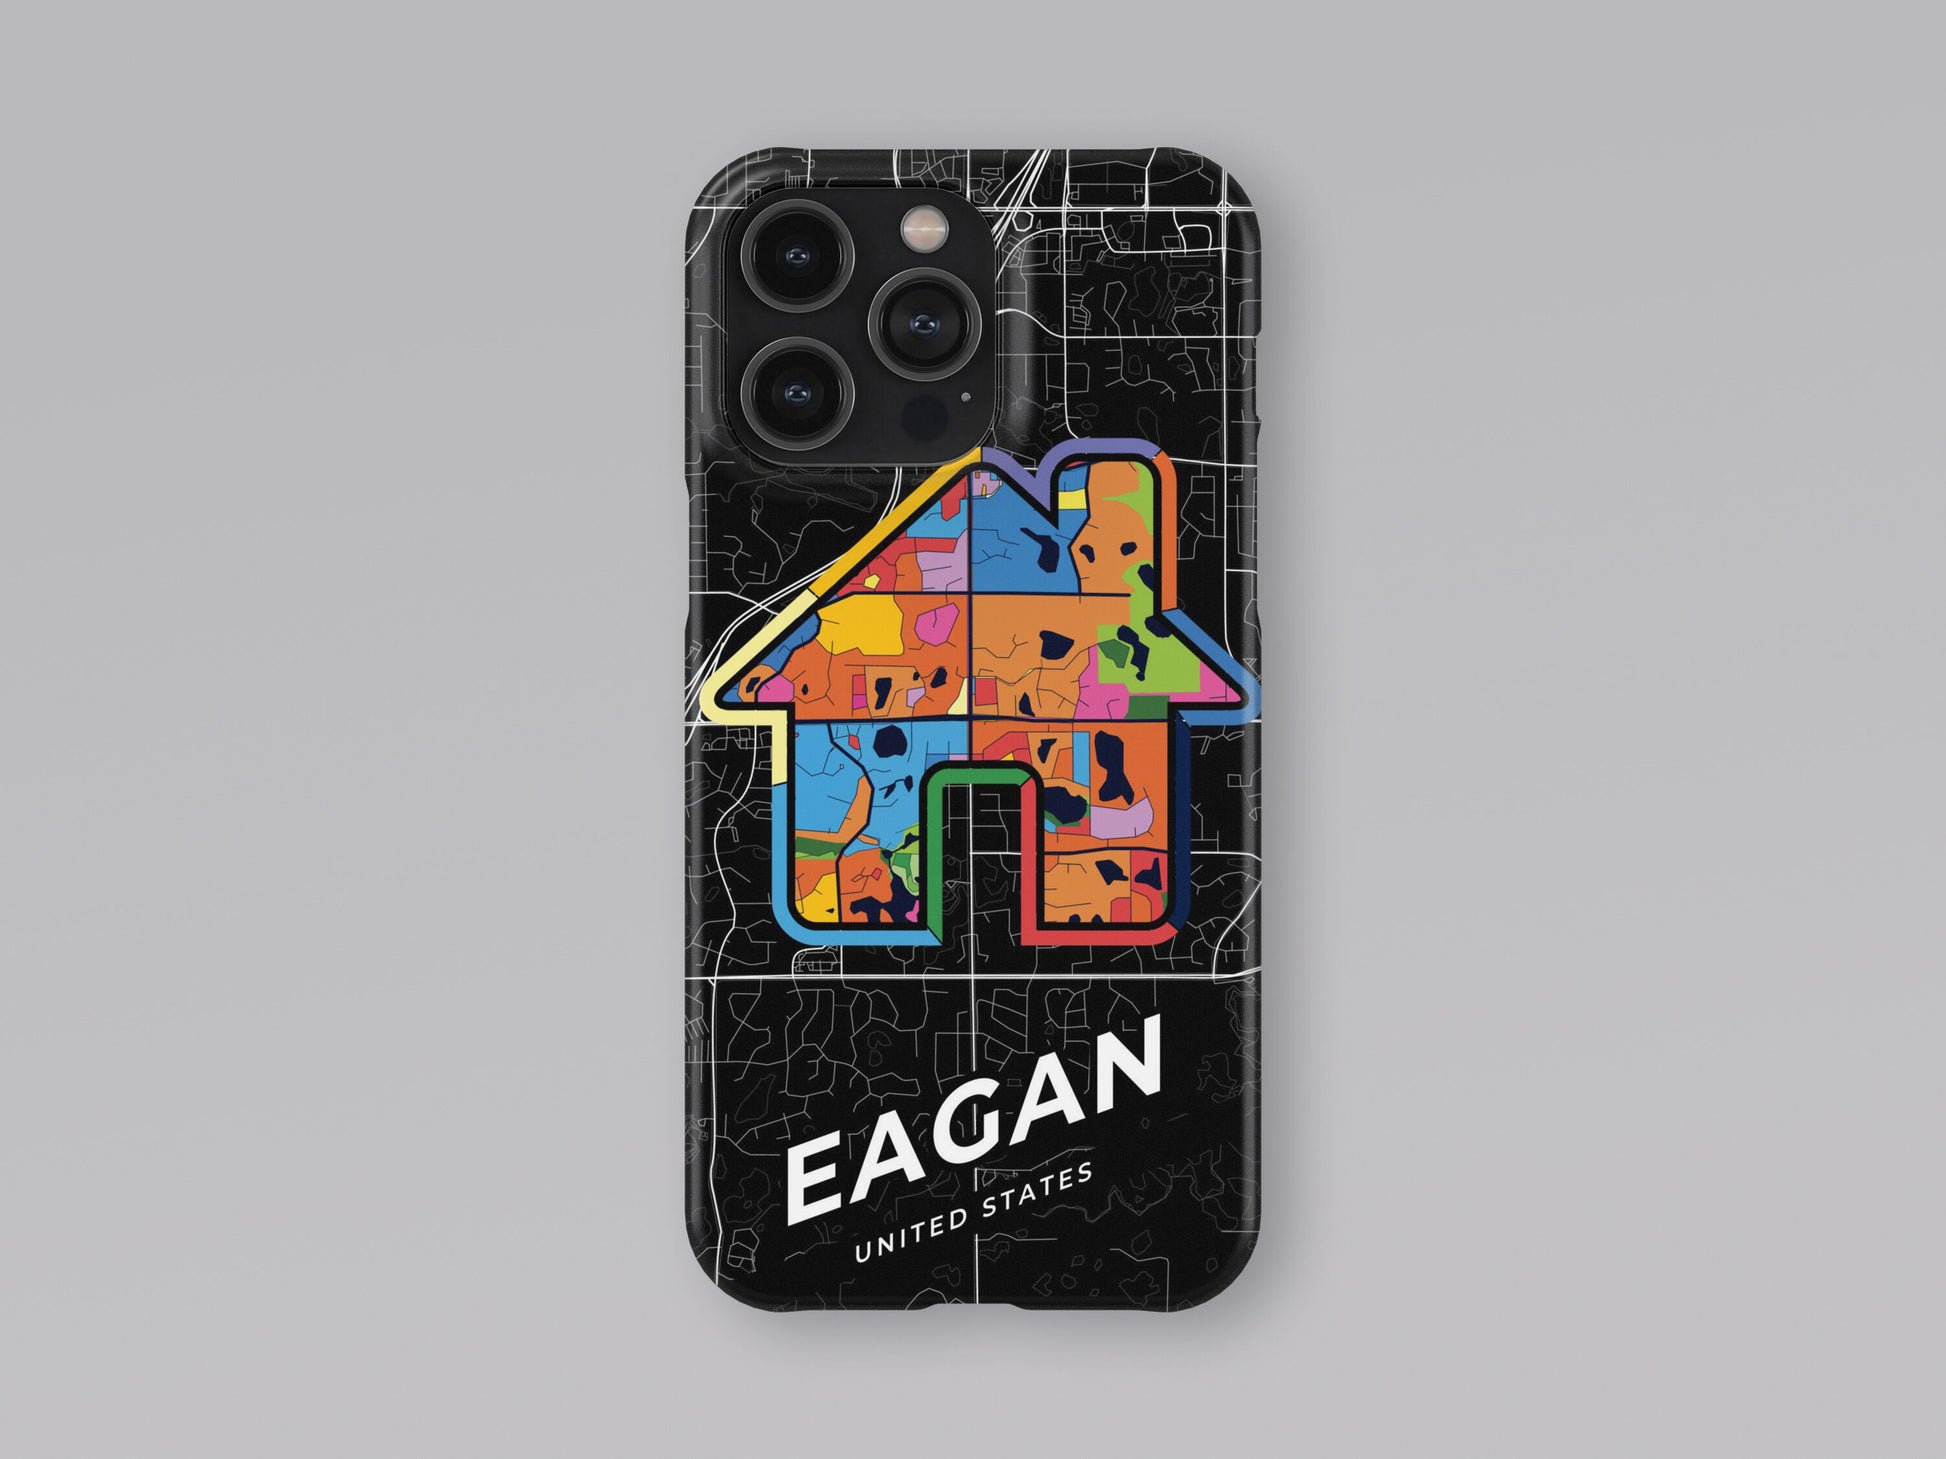 Eagan Minnesota slim phone case with colorful icon. Birthday, wedding or housewarming gift. Couple match cases. 3